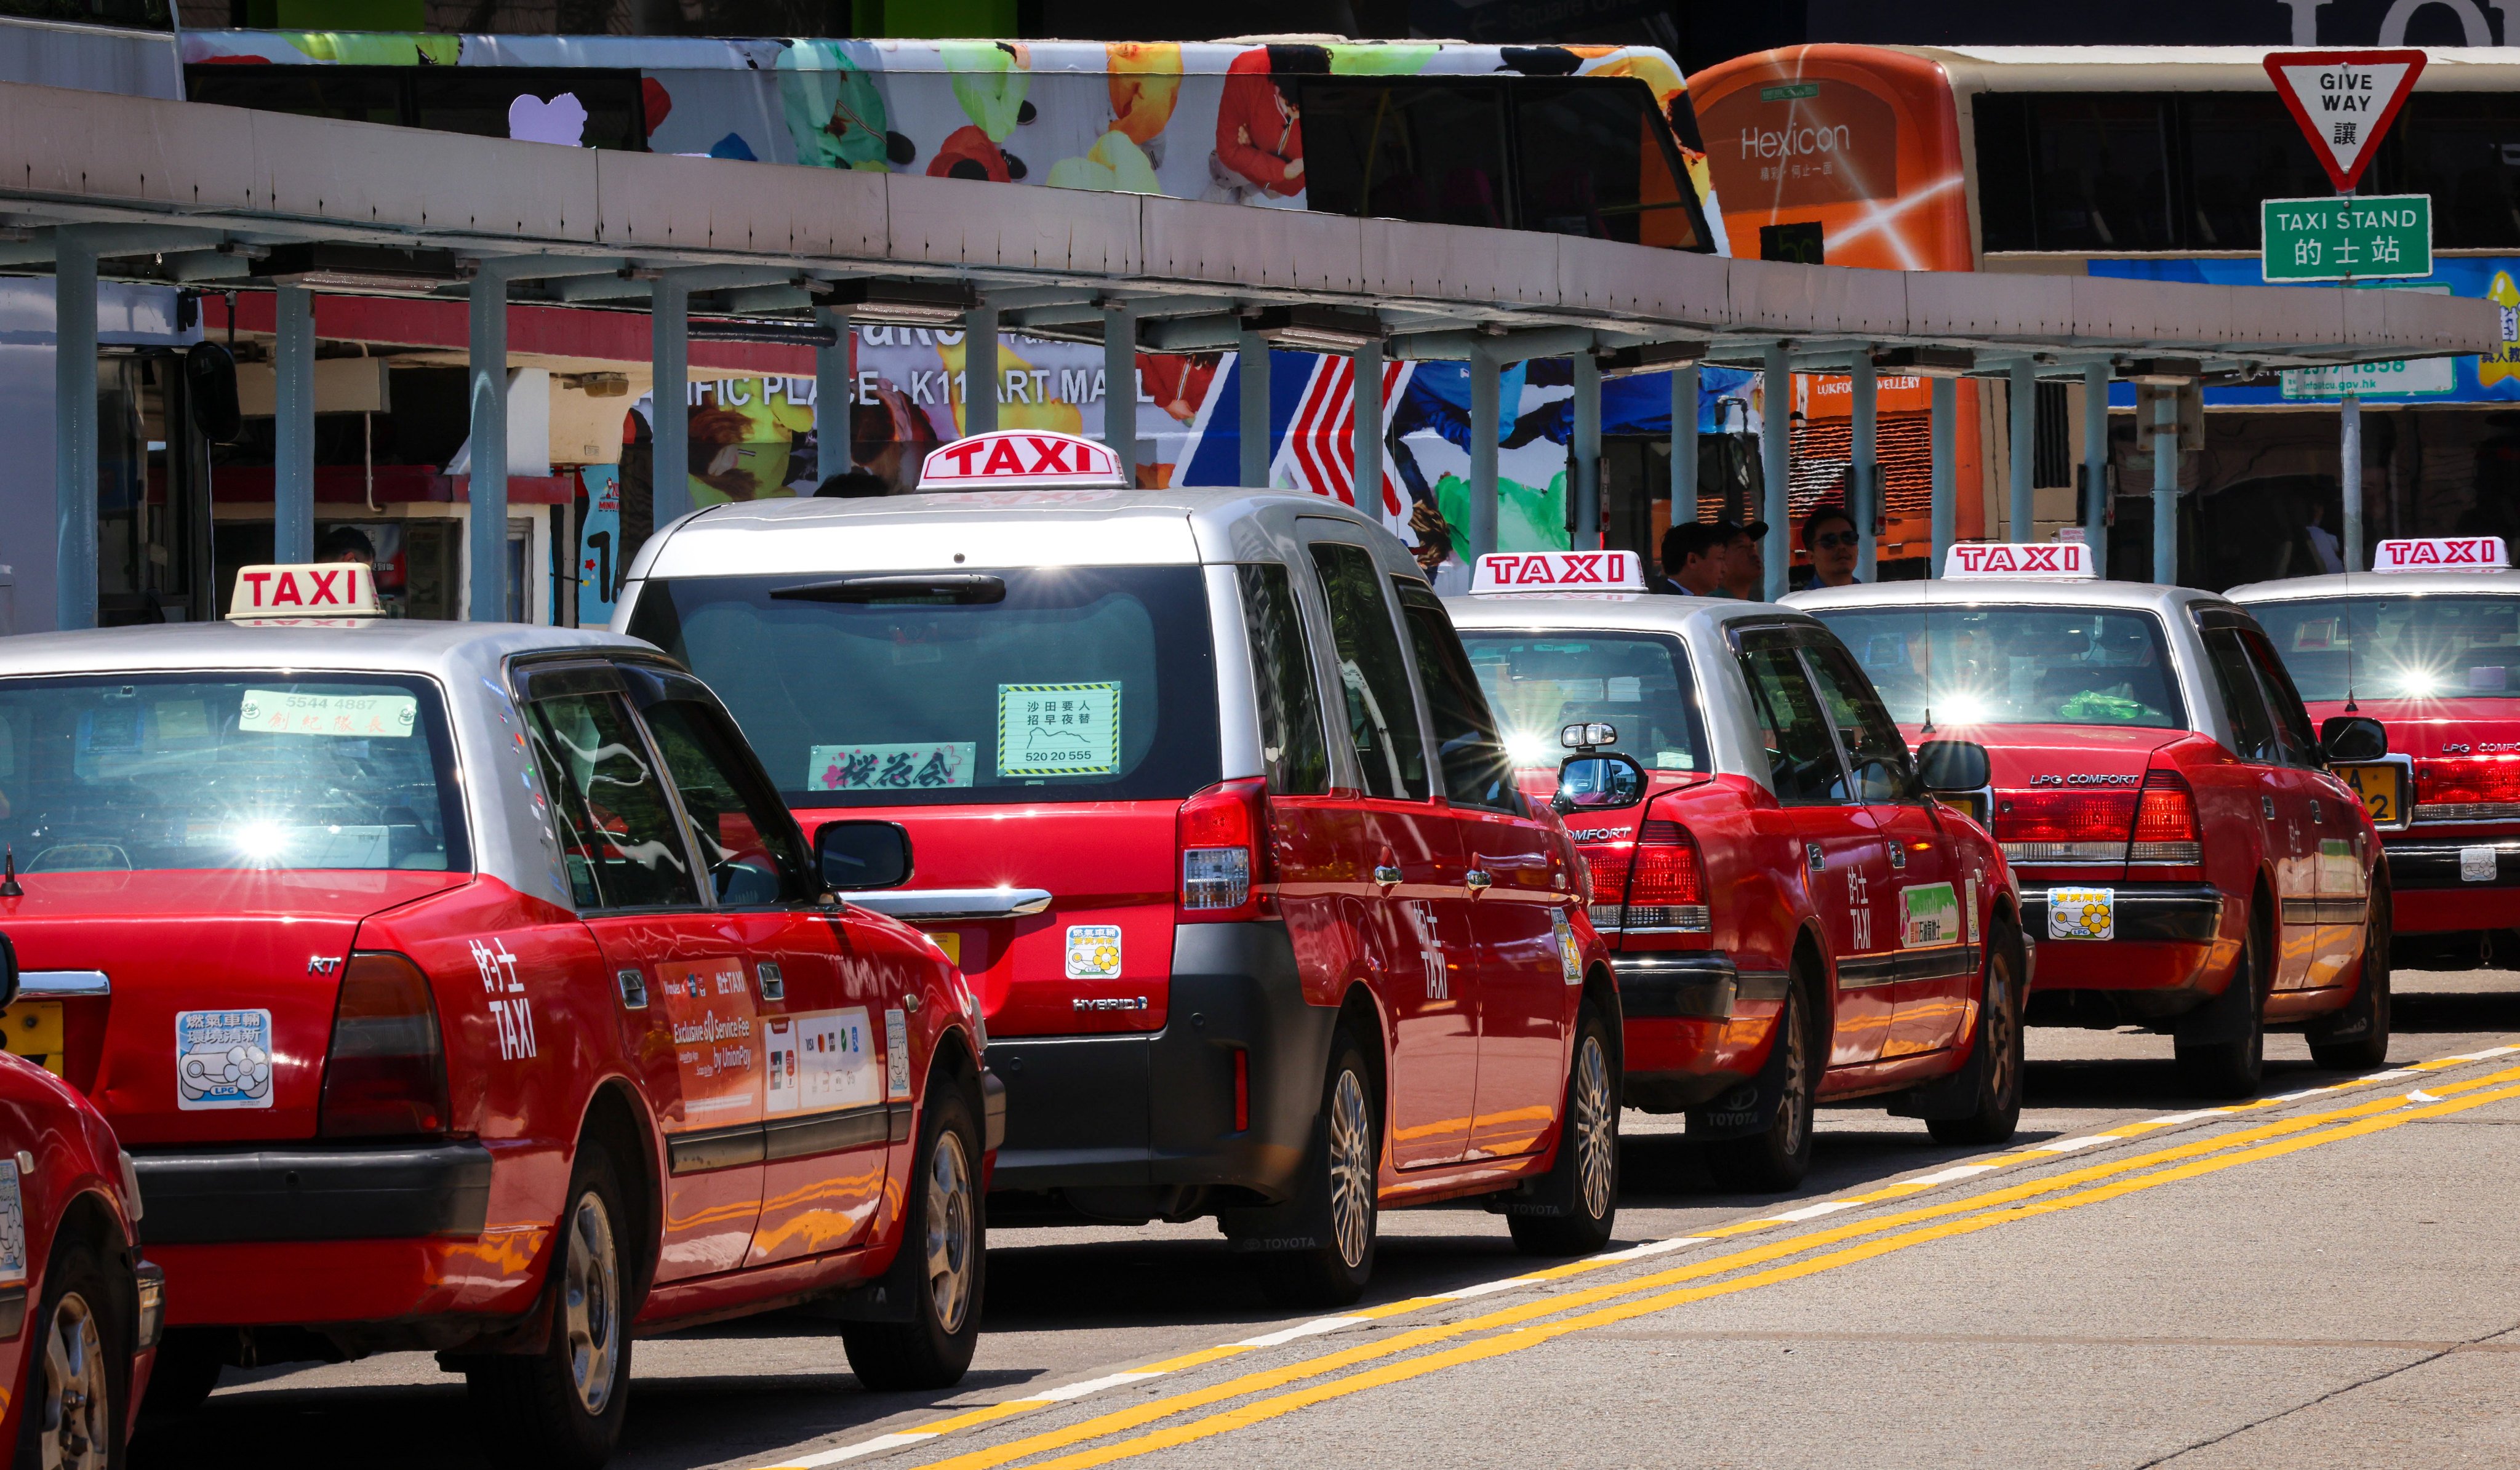 Hong Kong’s taxi trade has in recent years been marred by complaints of bad service and overcharging. Photo: Jelly Tse